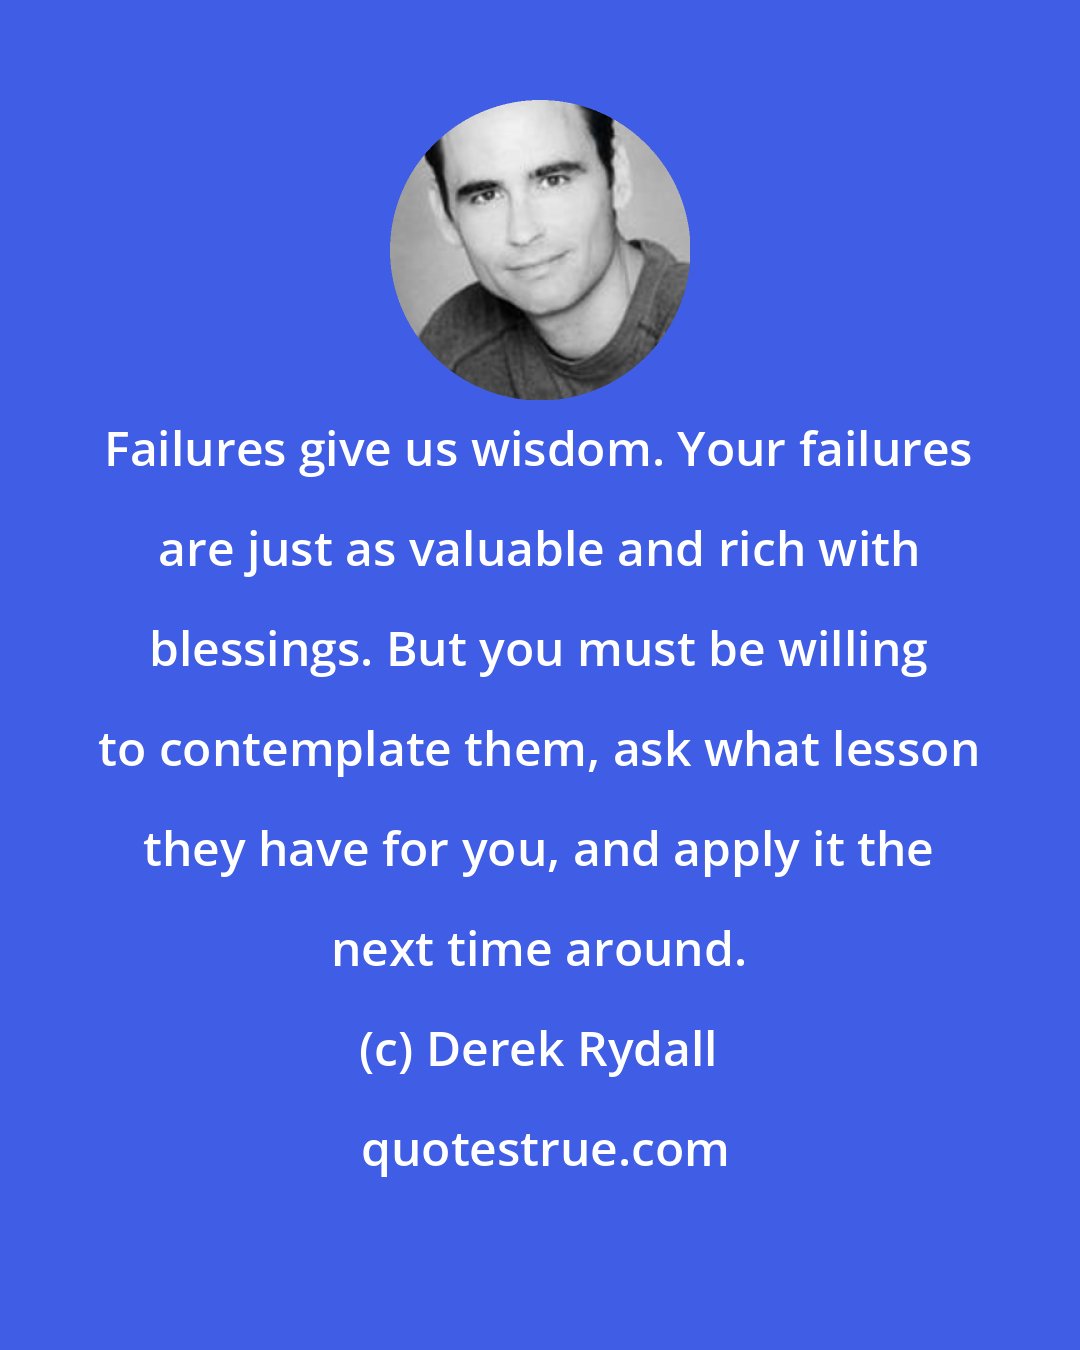 Derek Rydall: Failures give us wisdom. Your failures are just as valuable and rich with blessings. But you must be willing to contemplate them, ask what lesson they have for you, and apply it the next time around.